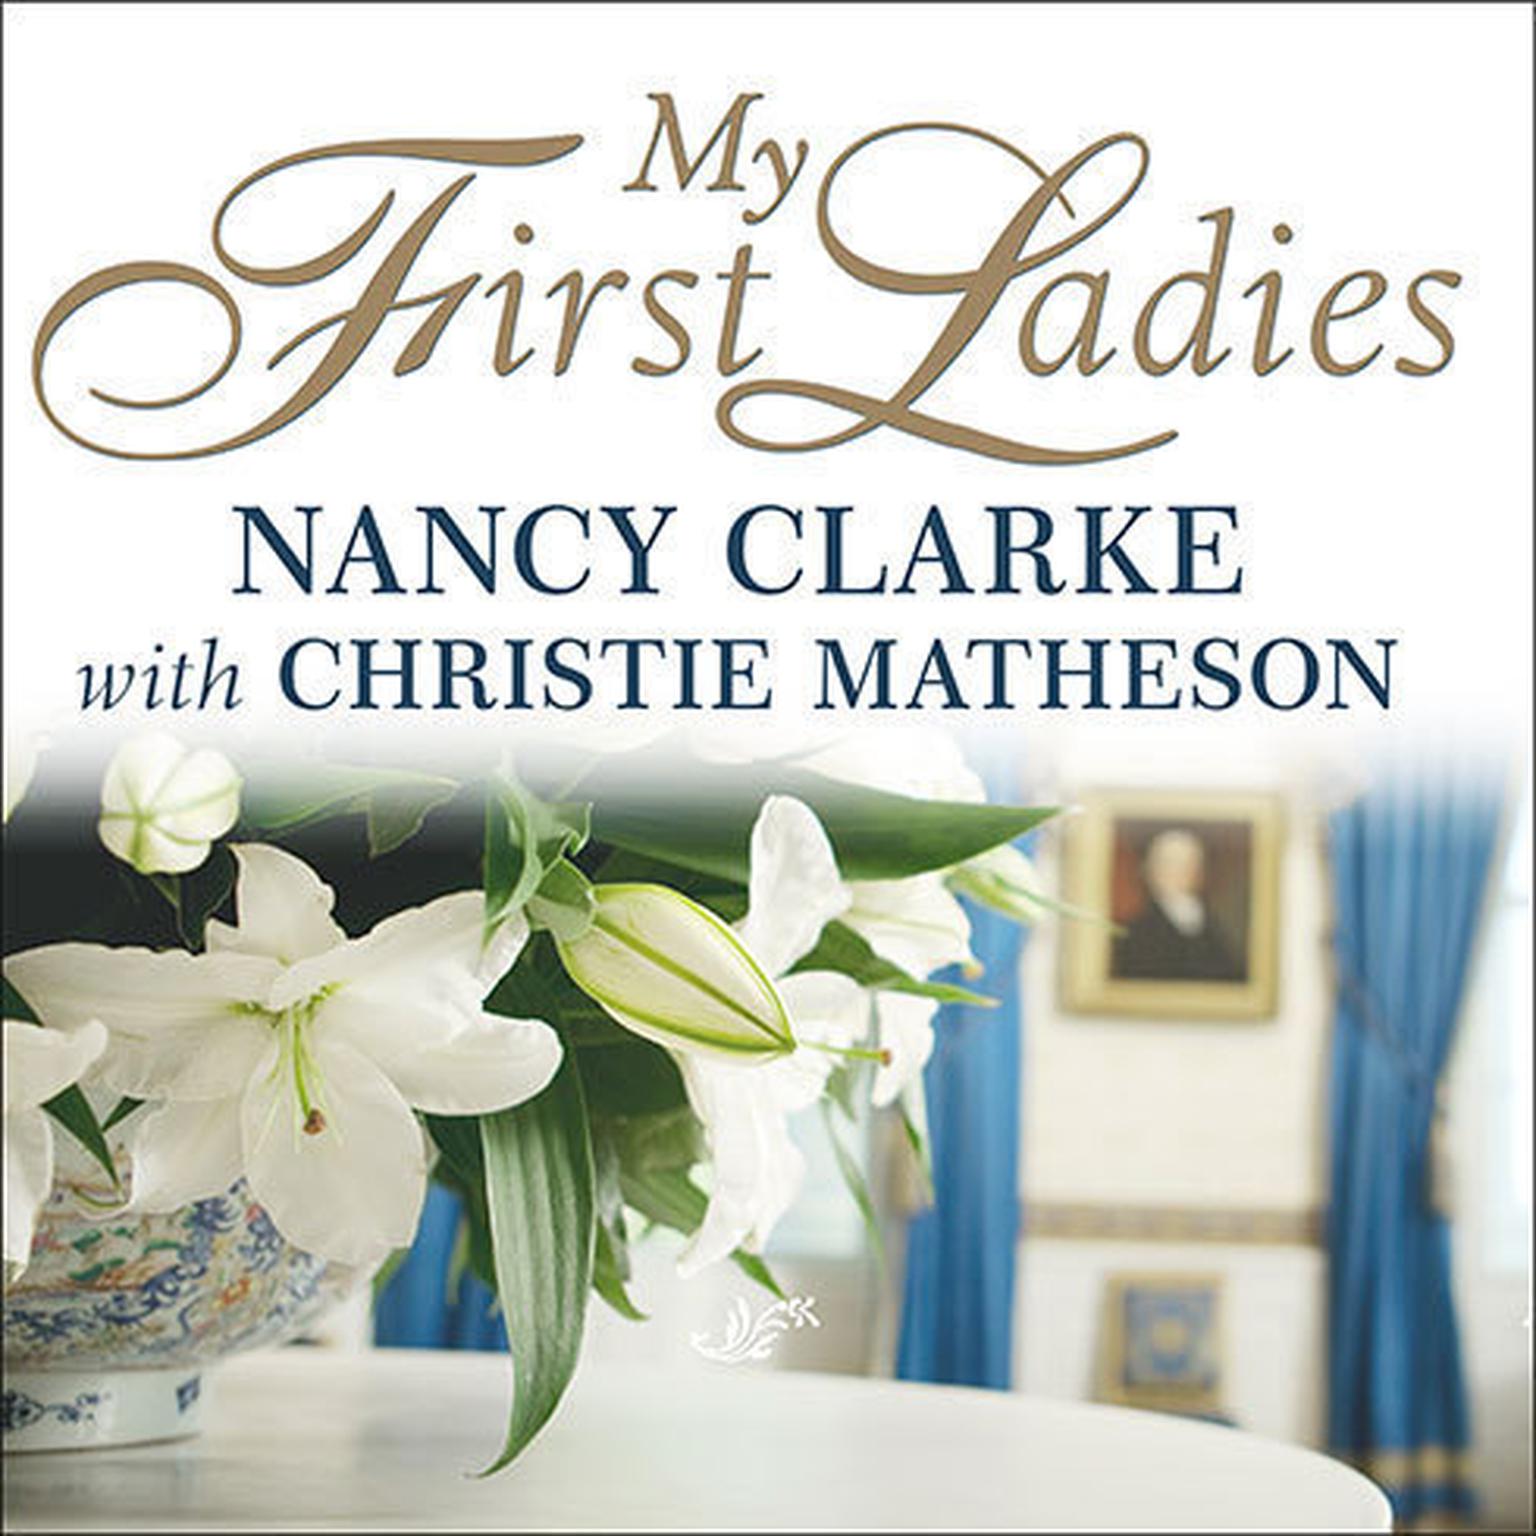 My First Ladies: Twenty-Five Years as the White House Chief Floral Designer Audiobook, by Nancy Clarke